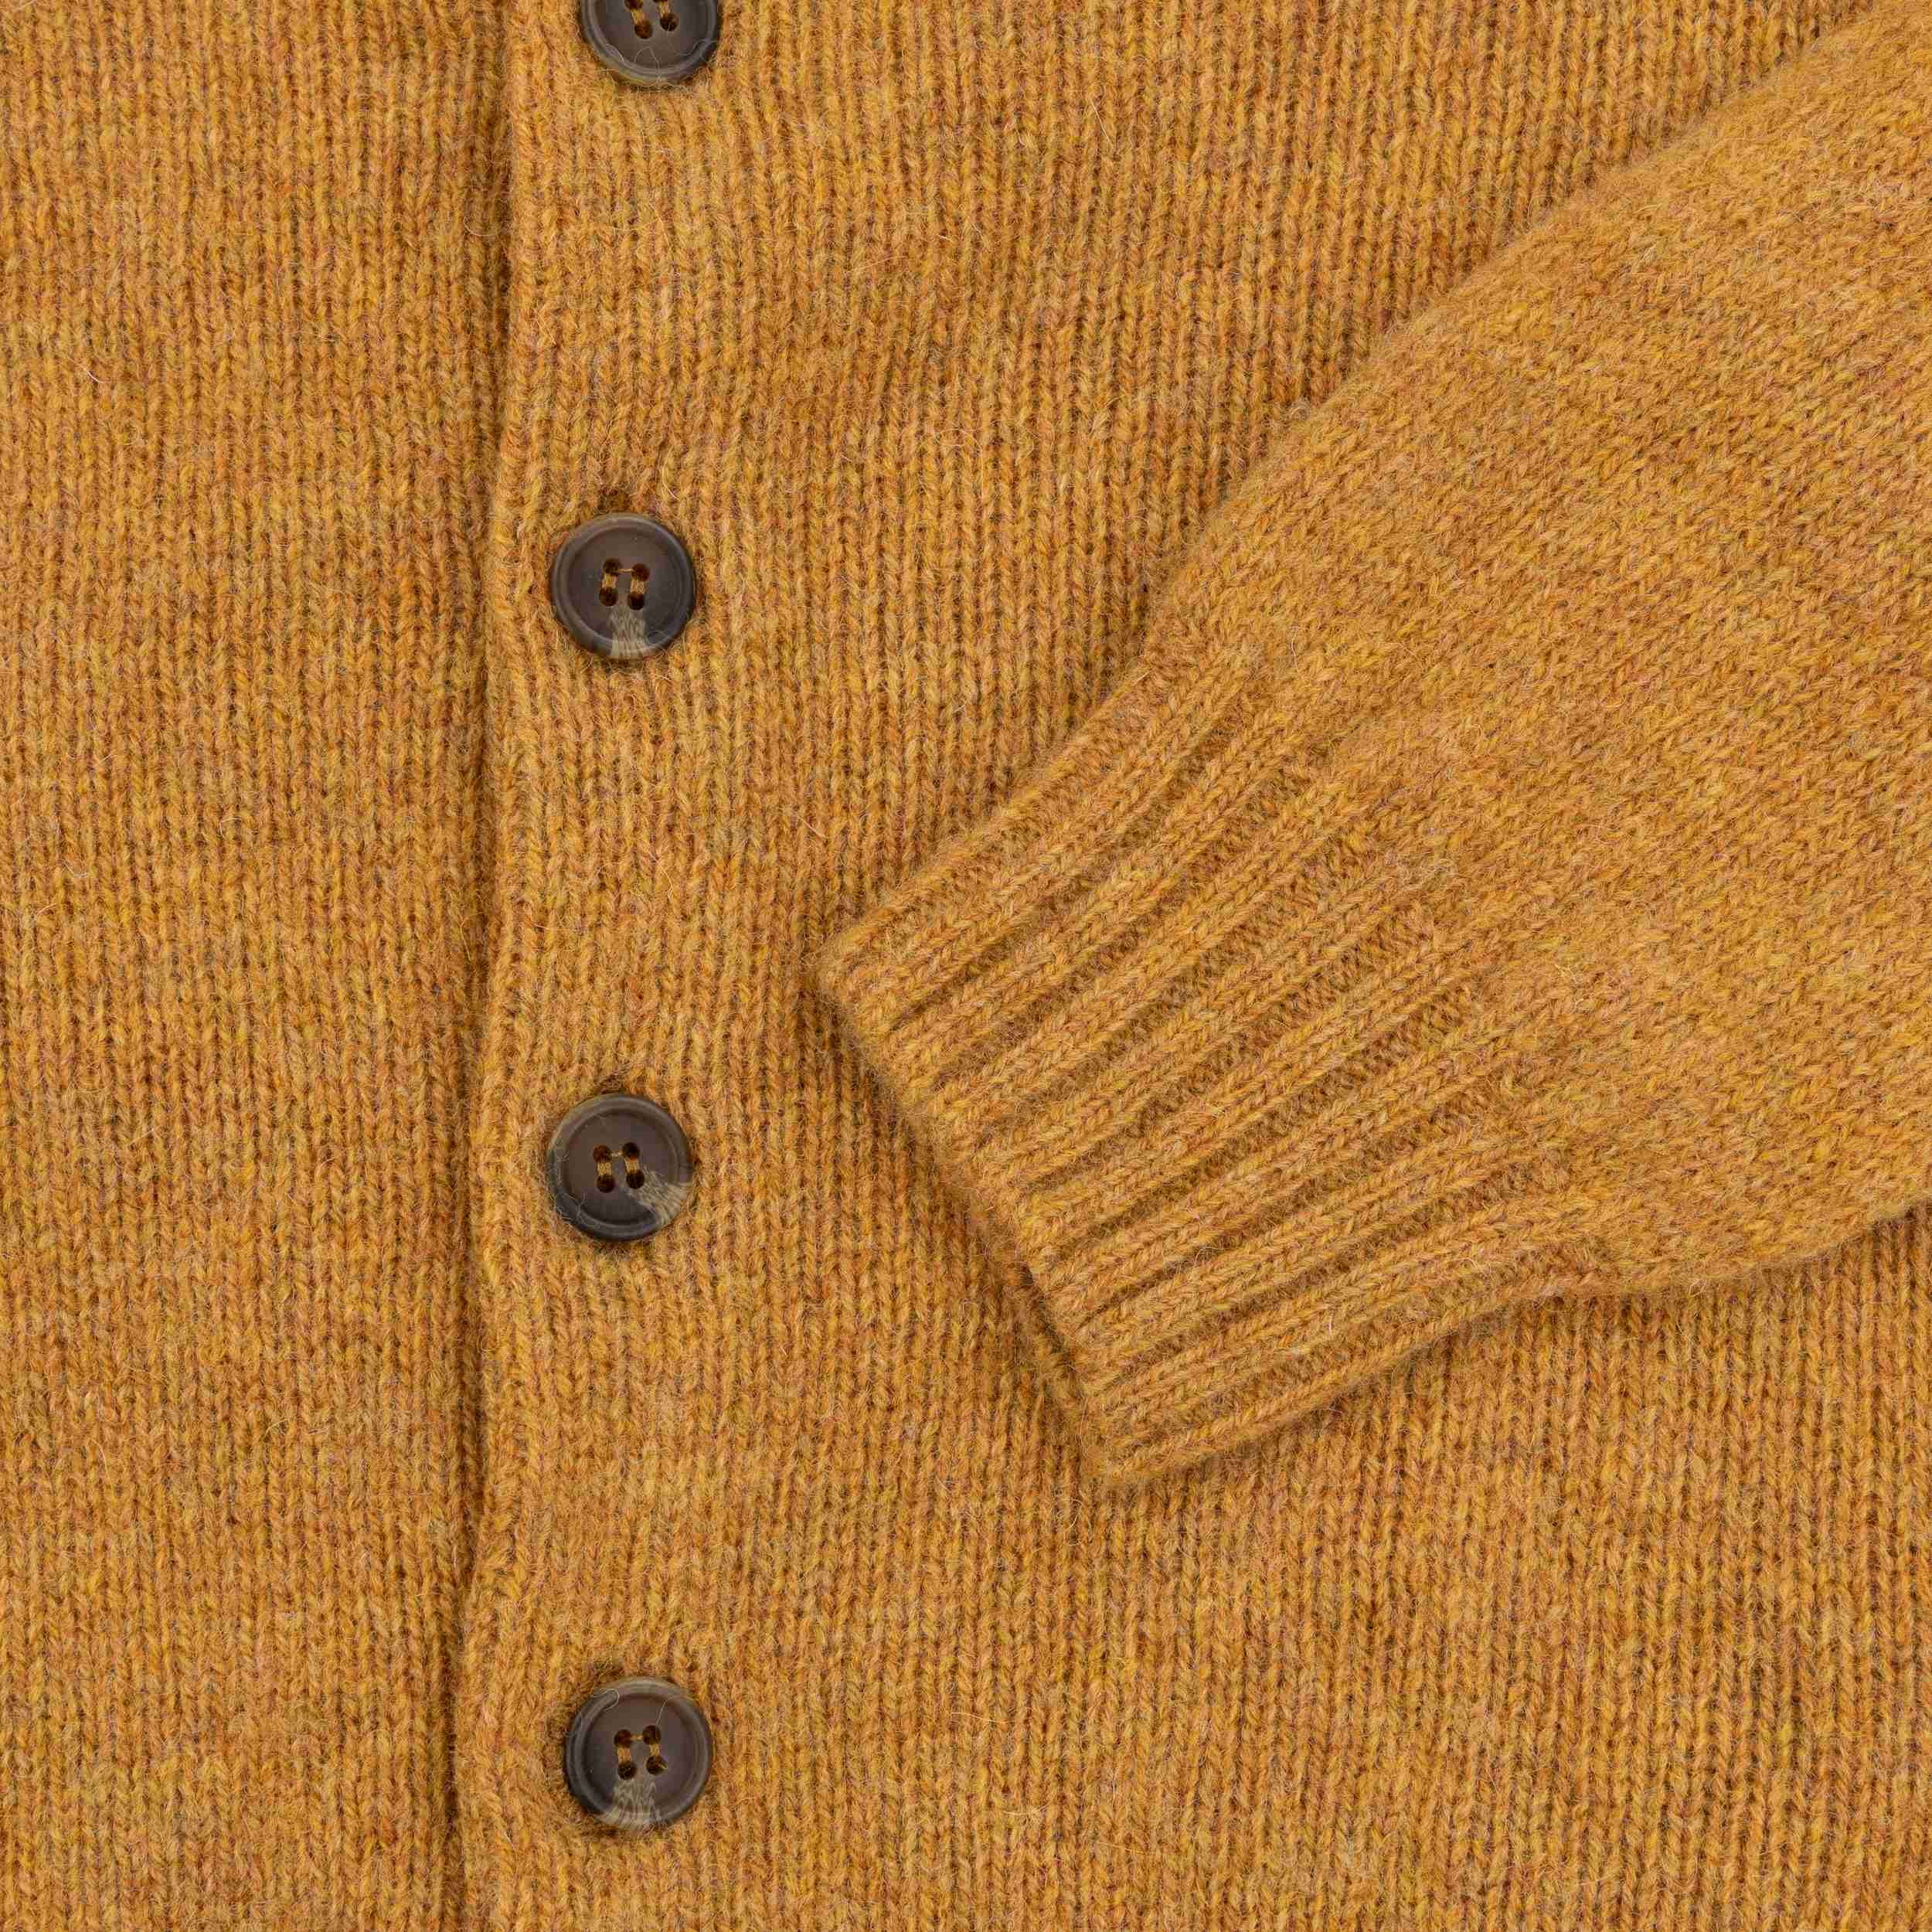 Carrier Company Shetland Lambswool Button Down V Neck Cardigan in Cumin